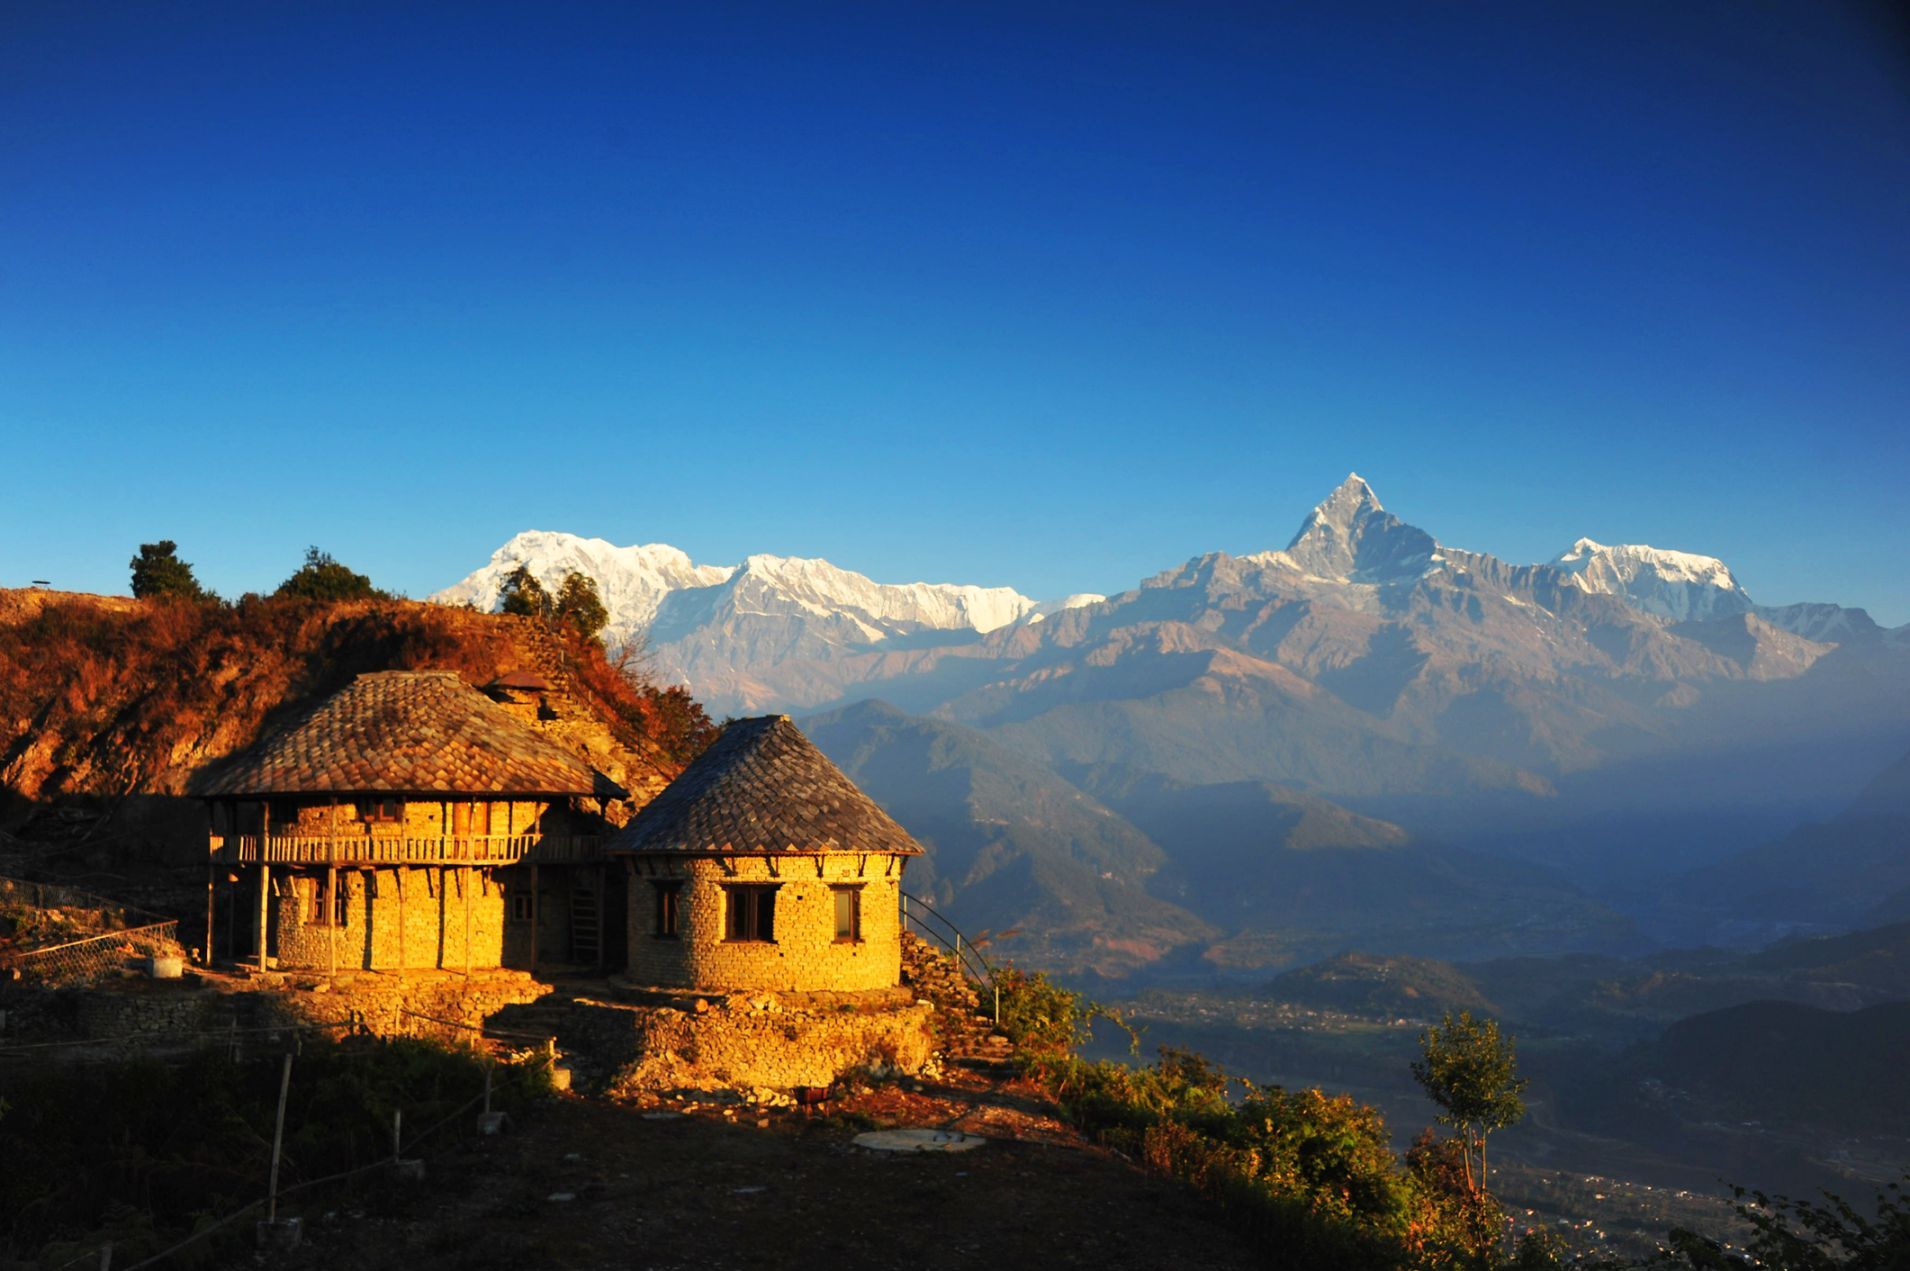 The view of a Himalayan house, near Annapurna, from the Sarangkot viewpoint. 